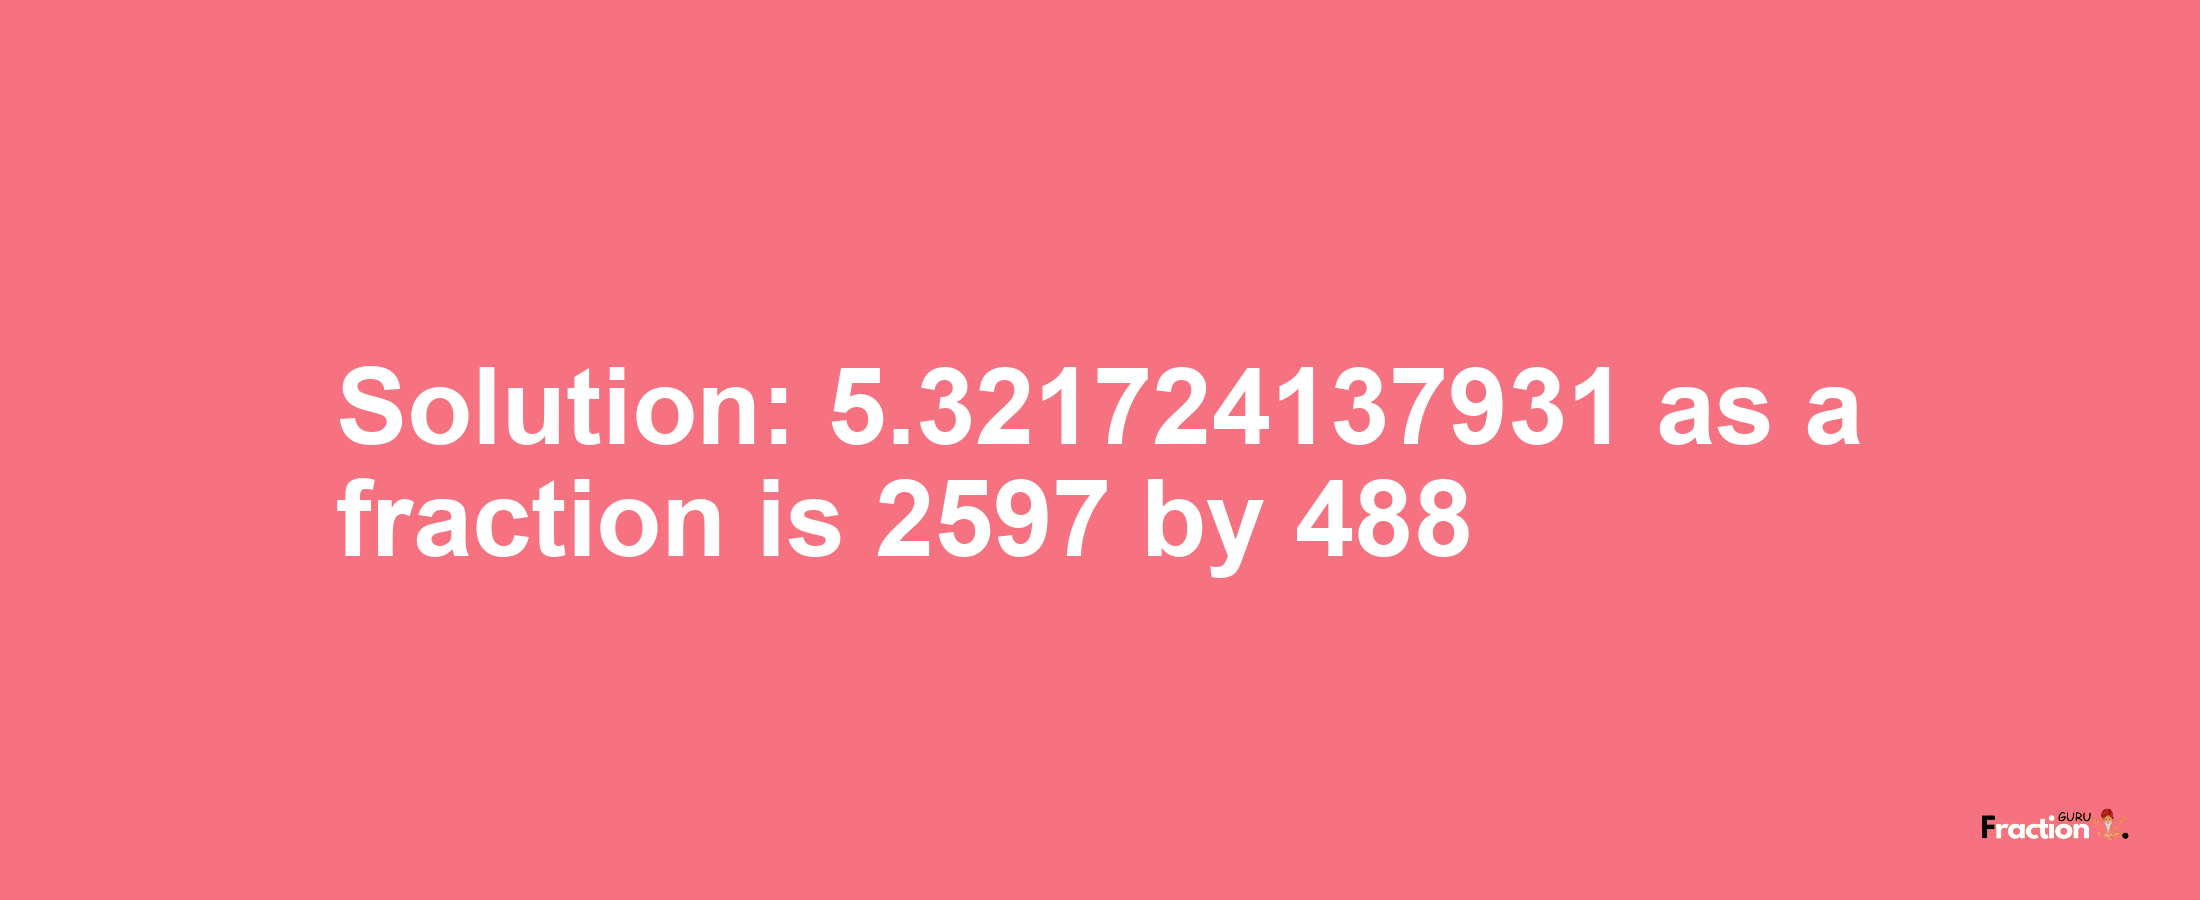 Solution:5.321724137931 as a fraction is 2597/488